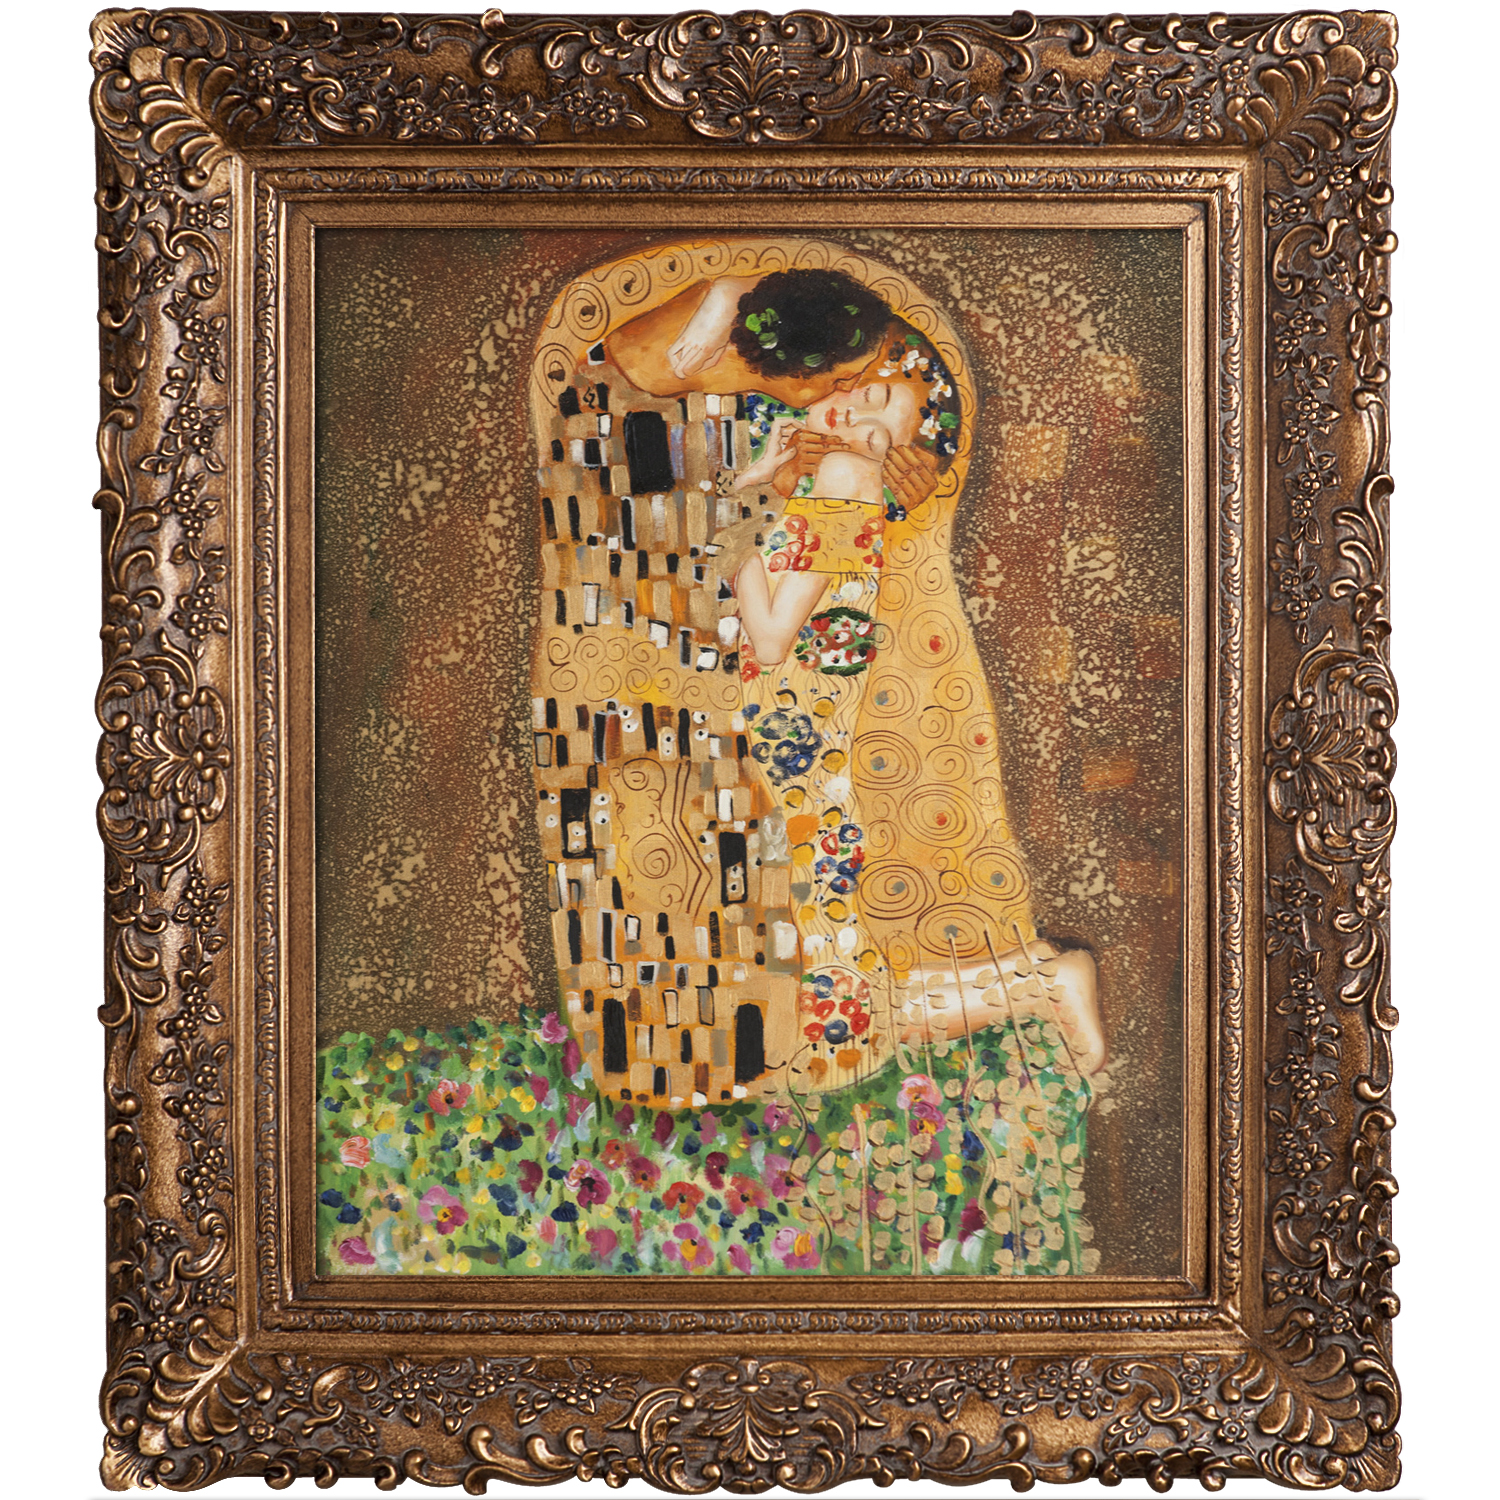 Gustav Klimt’s magnum opus “The Kiss” came in a close second, garnering eight percent of the clicks.